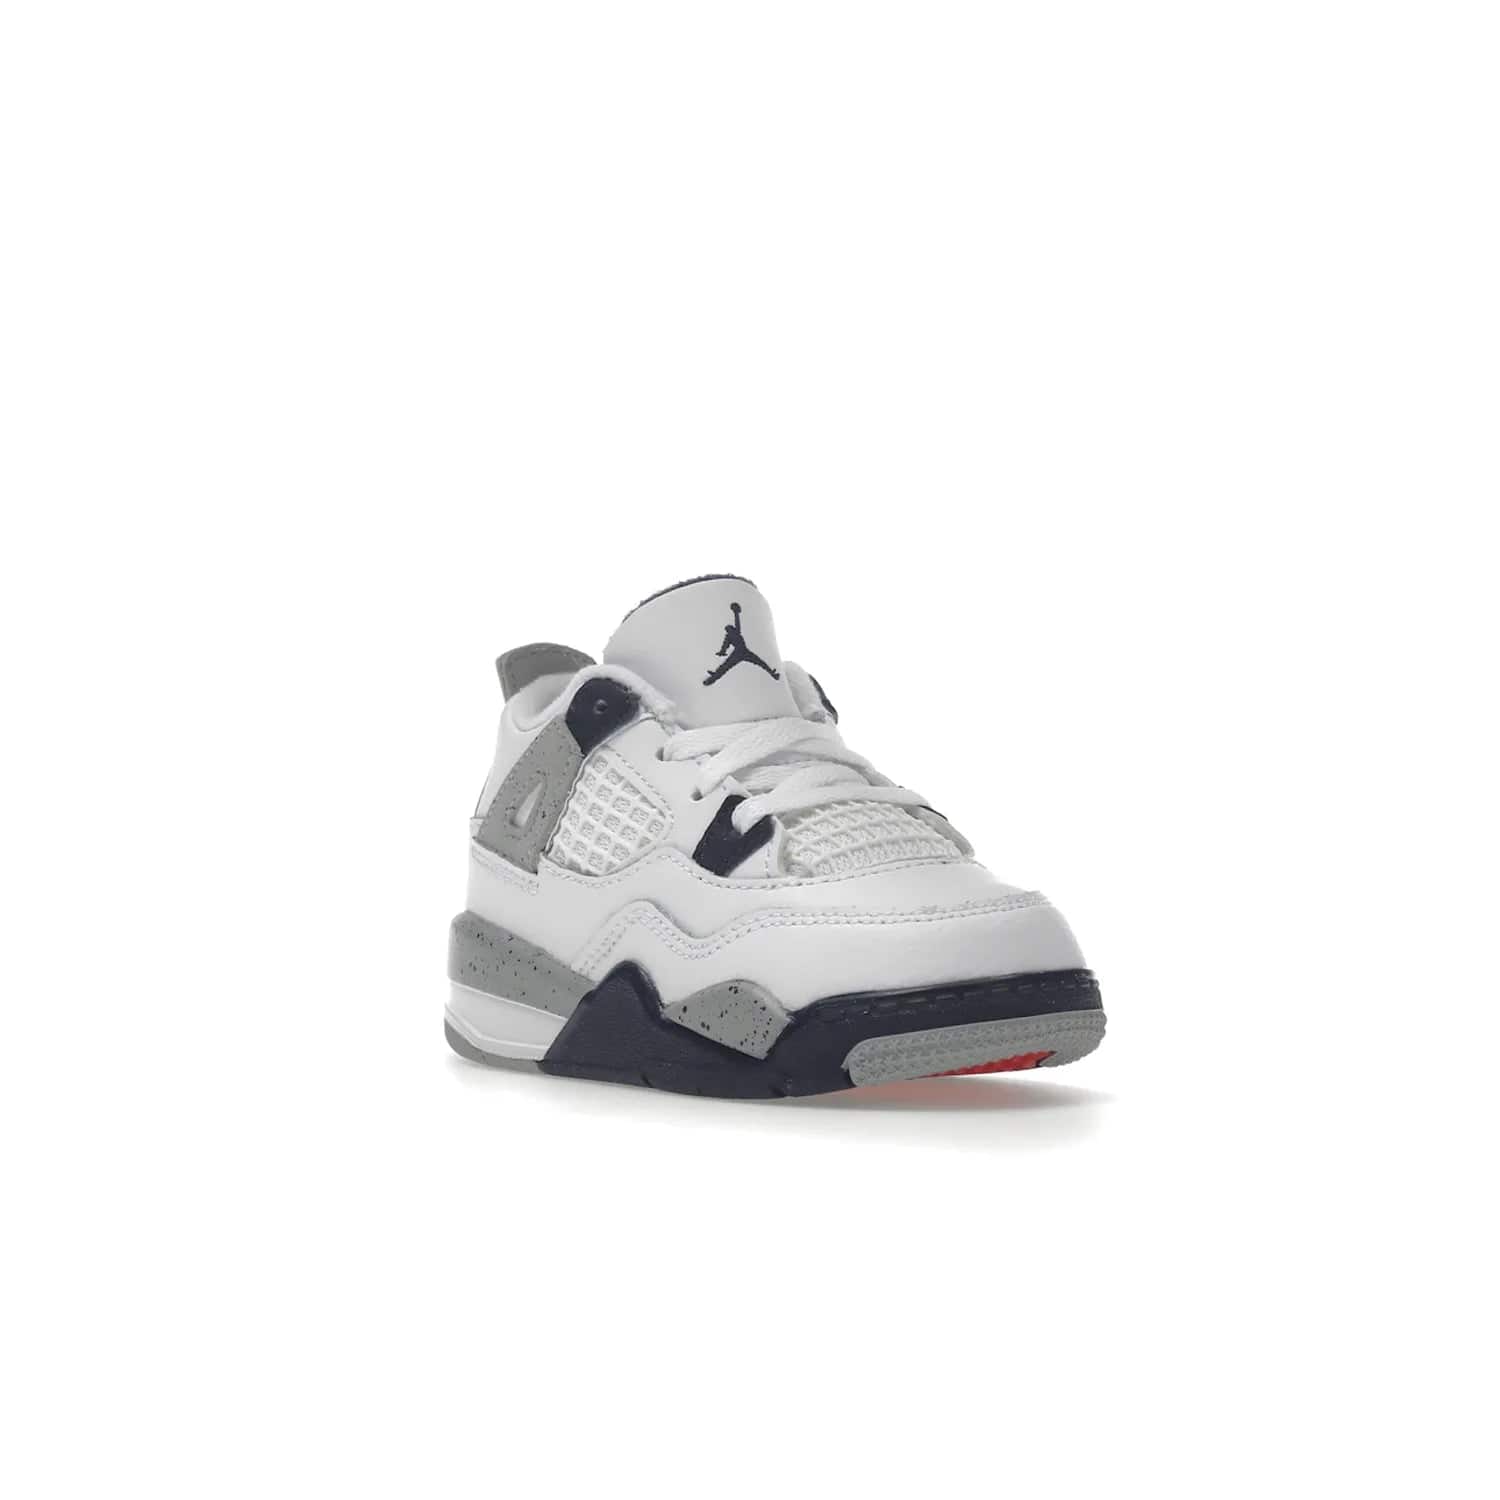 Jordan 4 Retro Midnight Navy (TD) - Image 6 - Only at www.BallersClubKickz.com - Introducing the Jordan 4 Retro Midnight Navy (TD) for kids. White leather upper with navy and grey accents plus fire red detailing. Perfect for everyday wear. Get yours before they sell out.